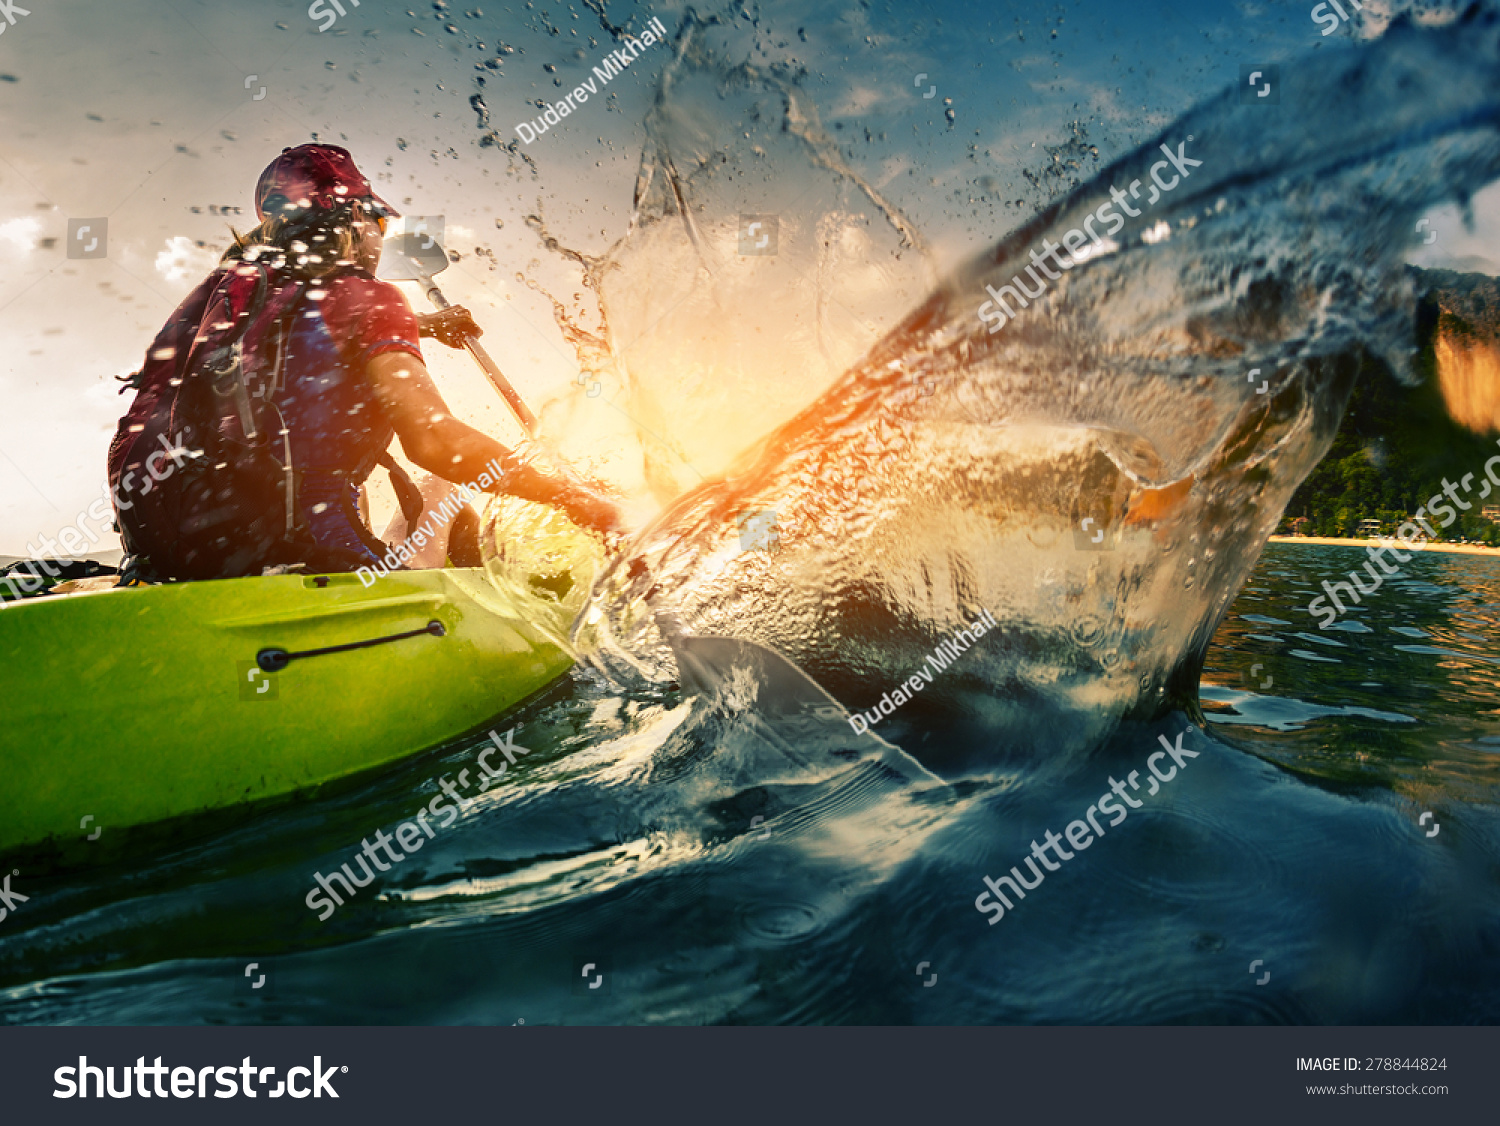 Young lady paddling hard the kayak with lots of splashes #278844824